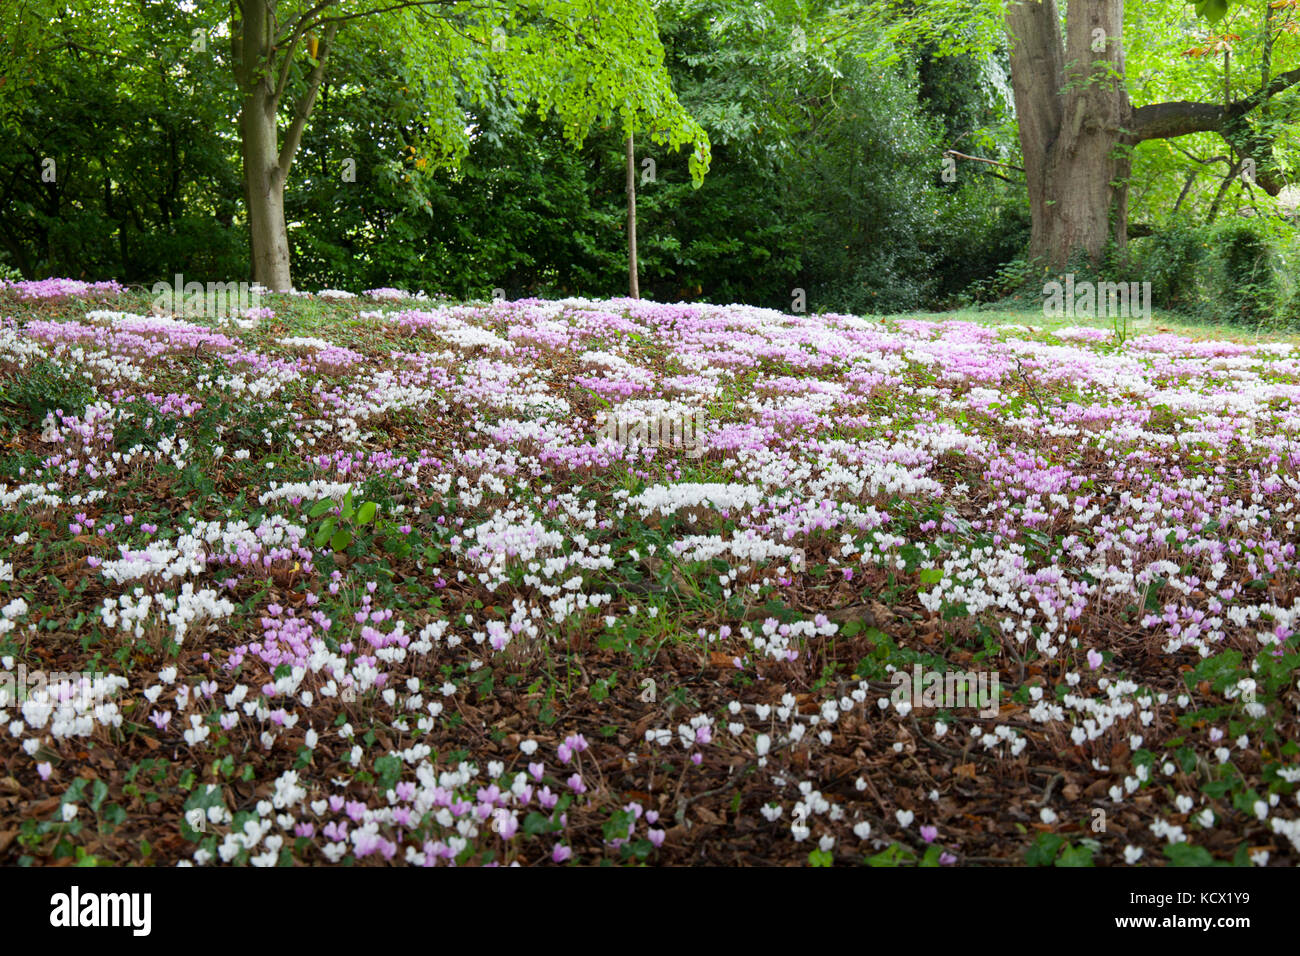 Cyclamen growing wild in a garden, Chipping Campden, Cotswolds, Gloucestershire, England, United Kingdom, Europe Stock Photo